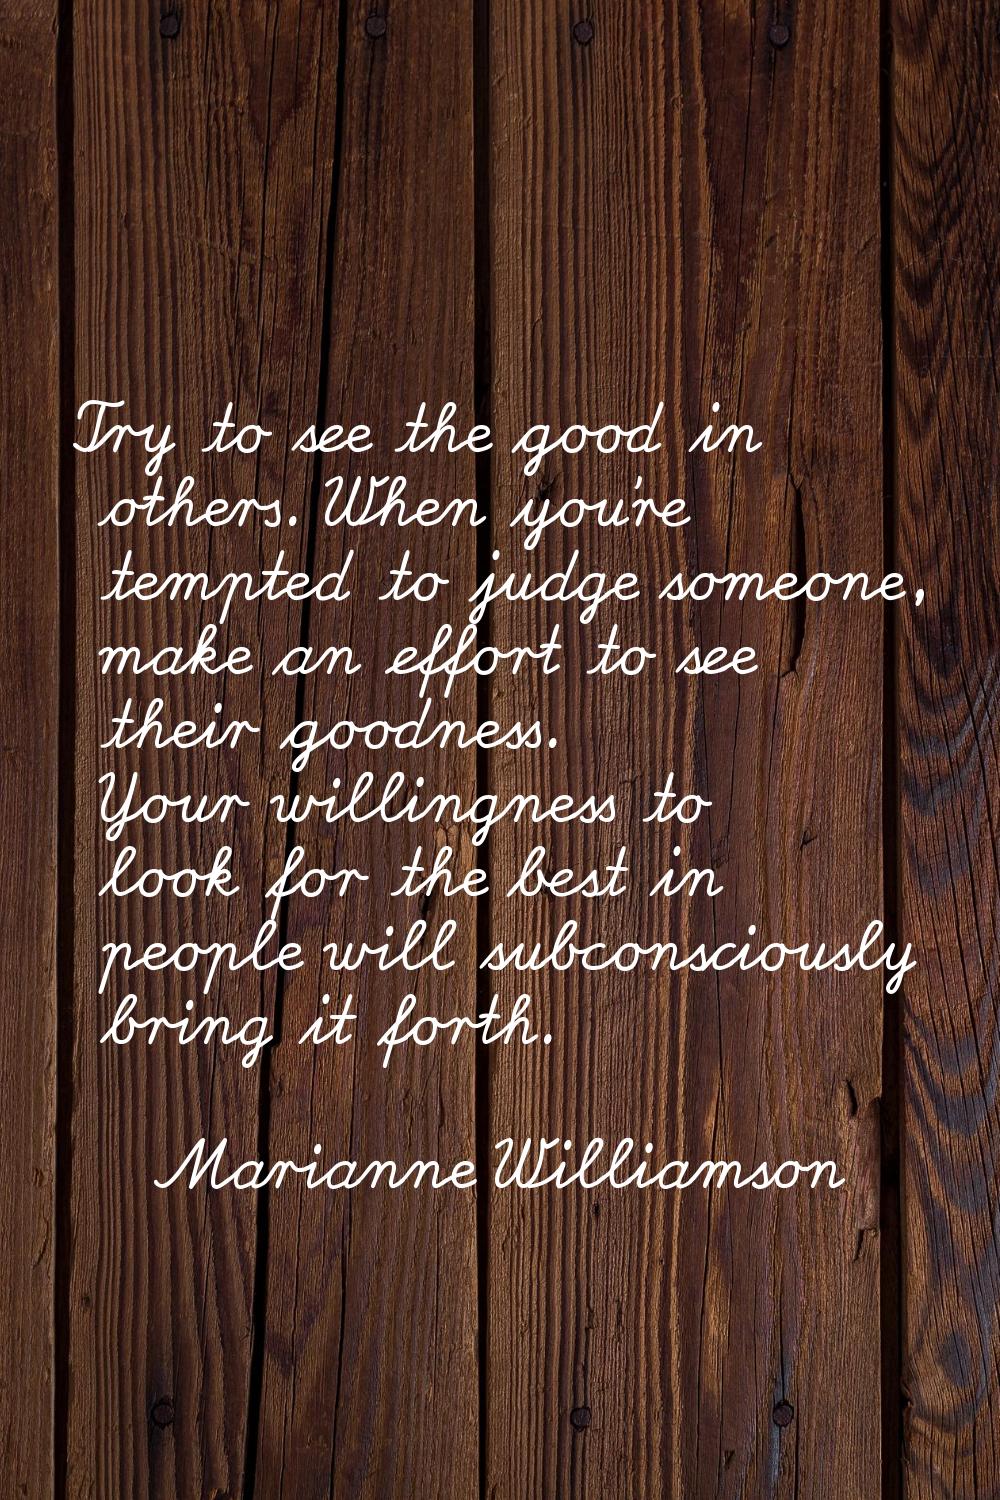 Try to see the good in others. When you're tempted to judge someone, make an effort to see their go